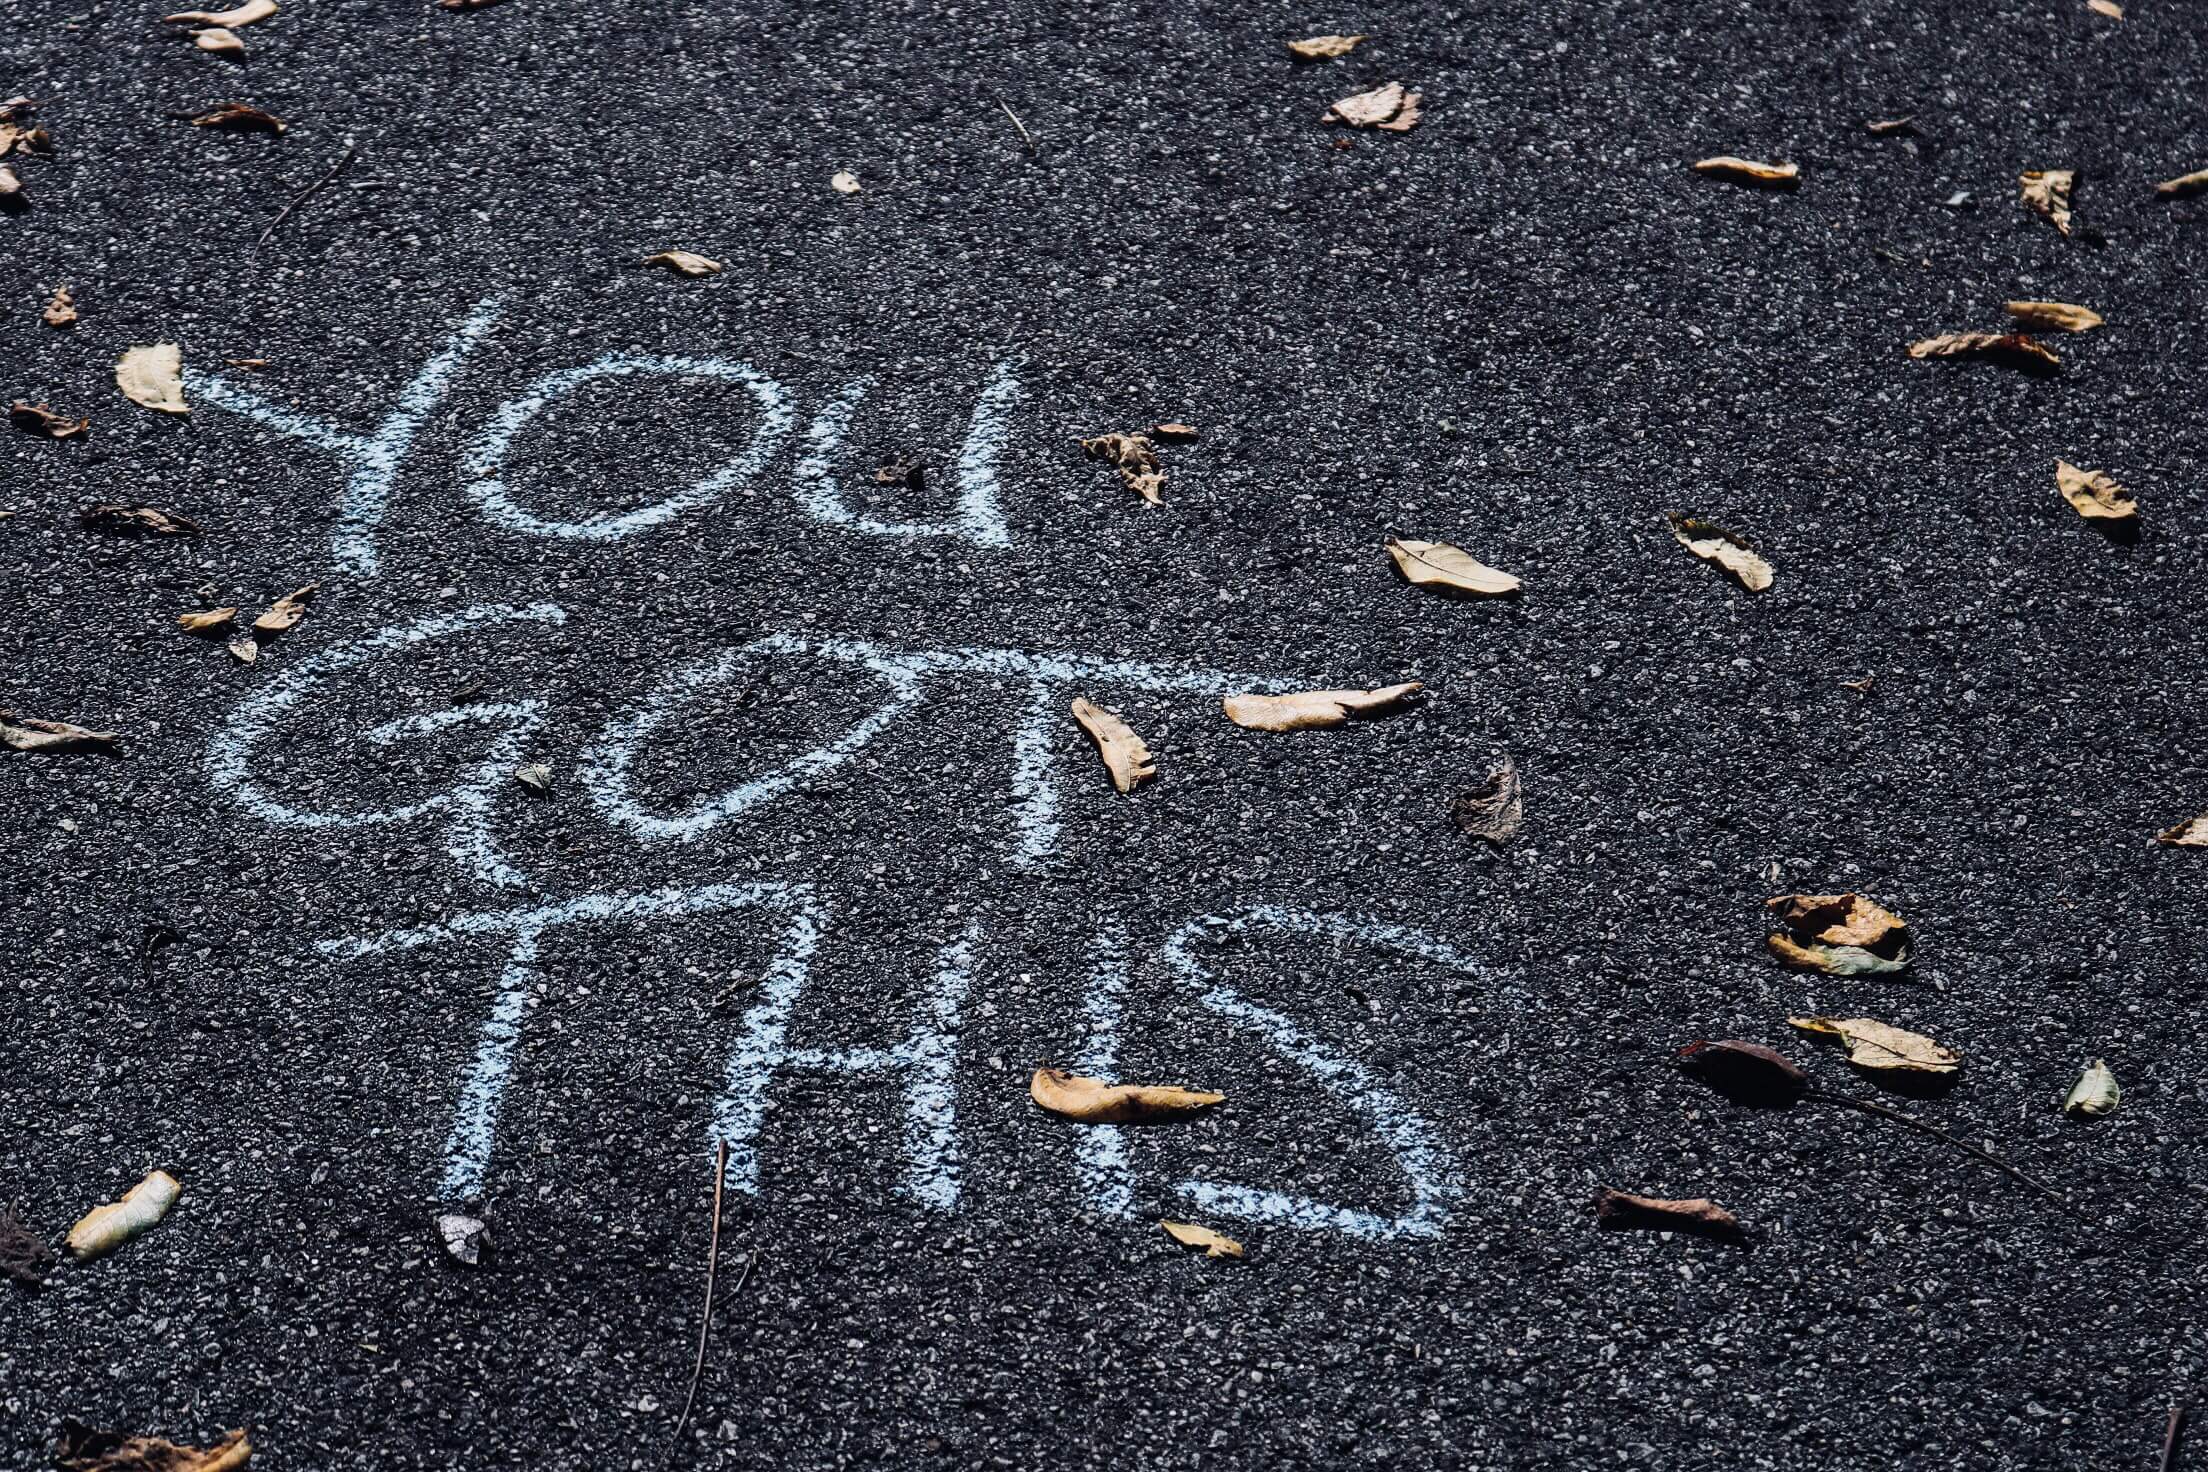 Motivational words “You got this” for students with senioritis written with chalk on an asphalt road